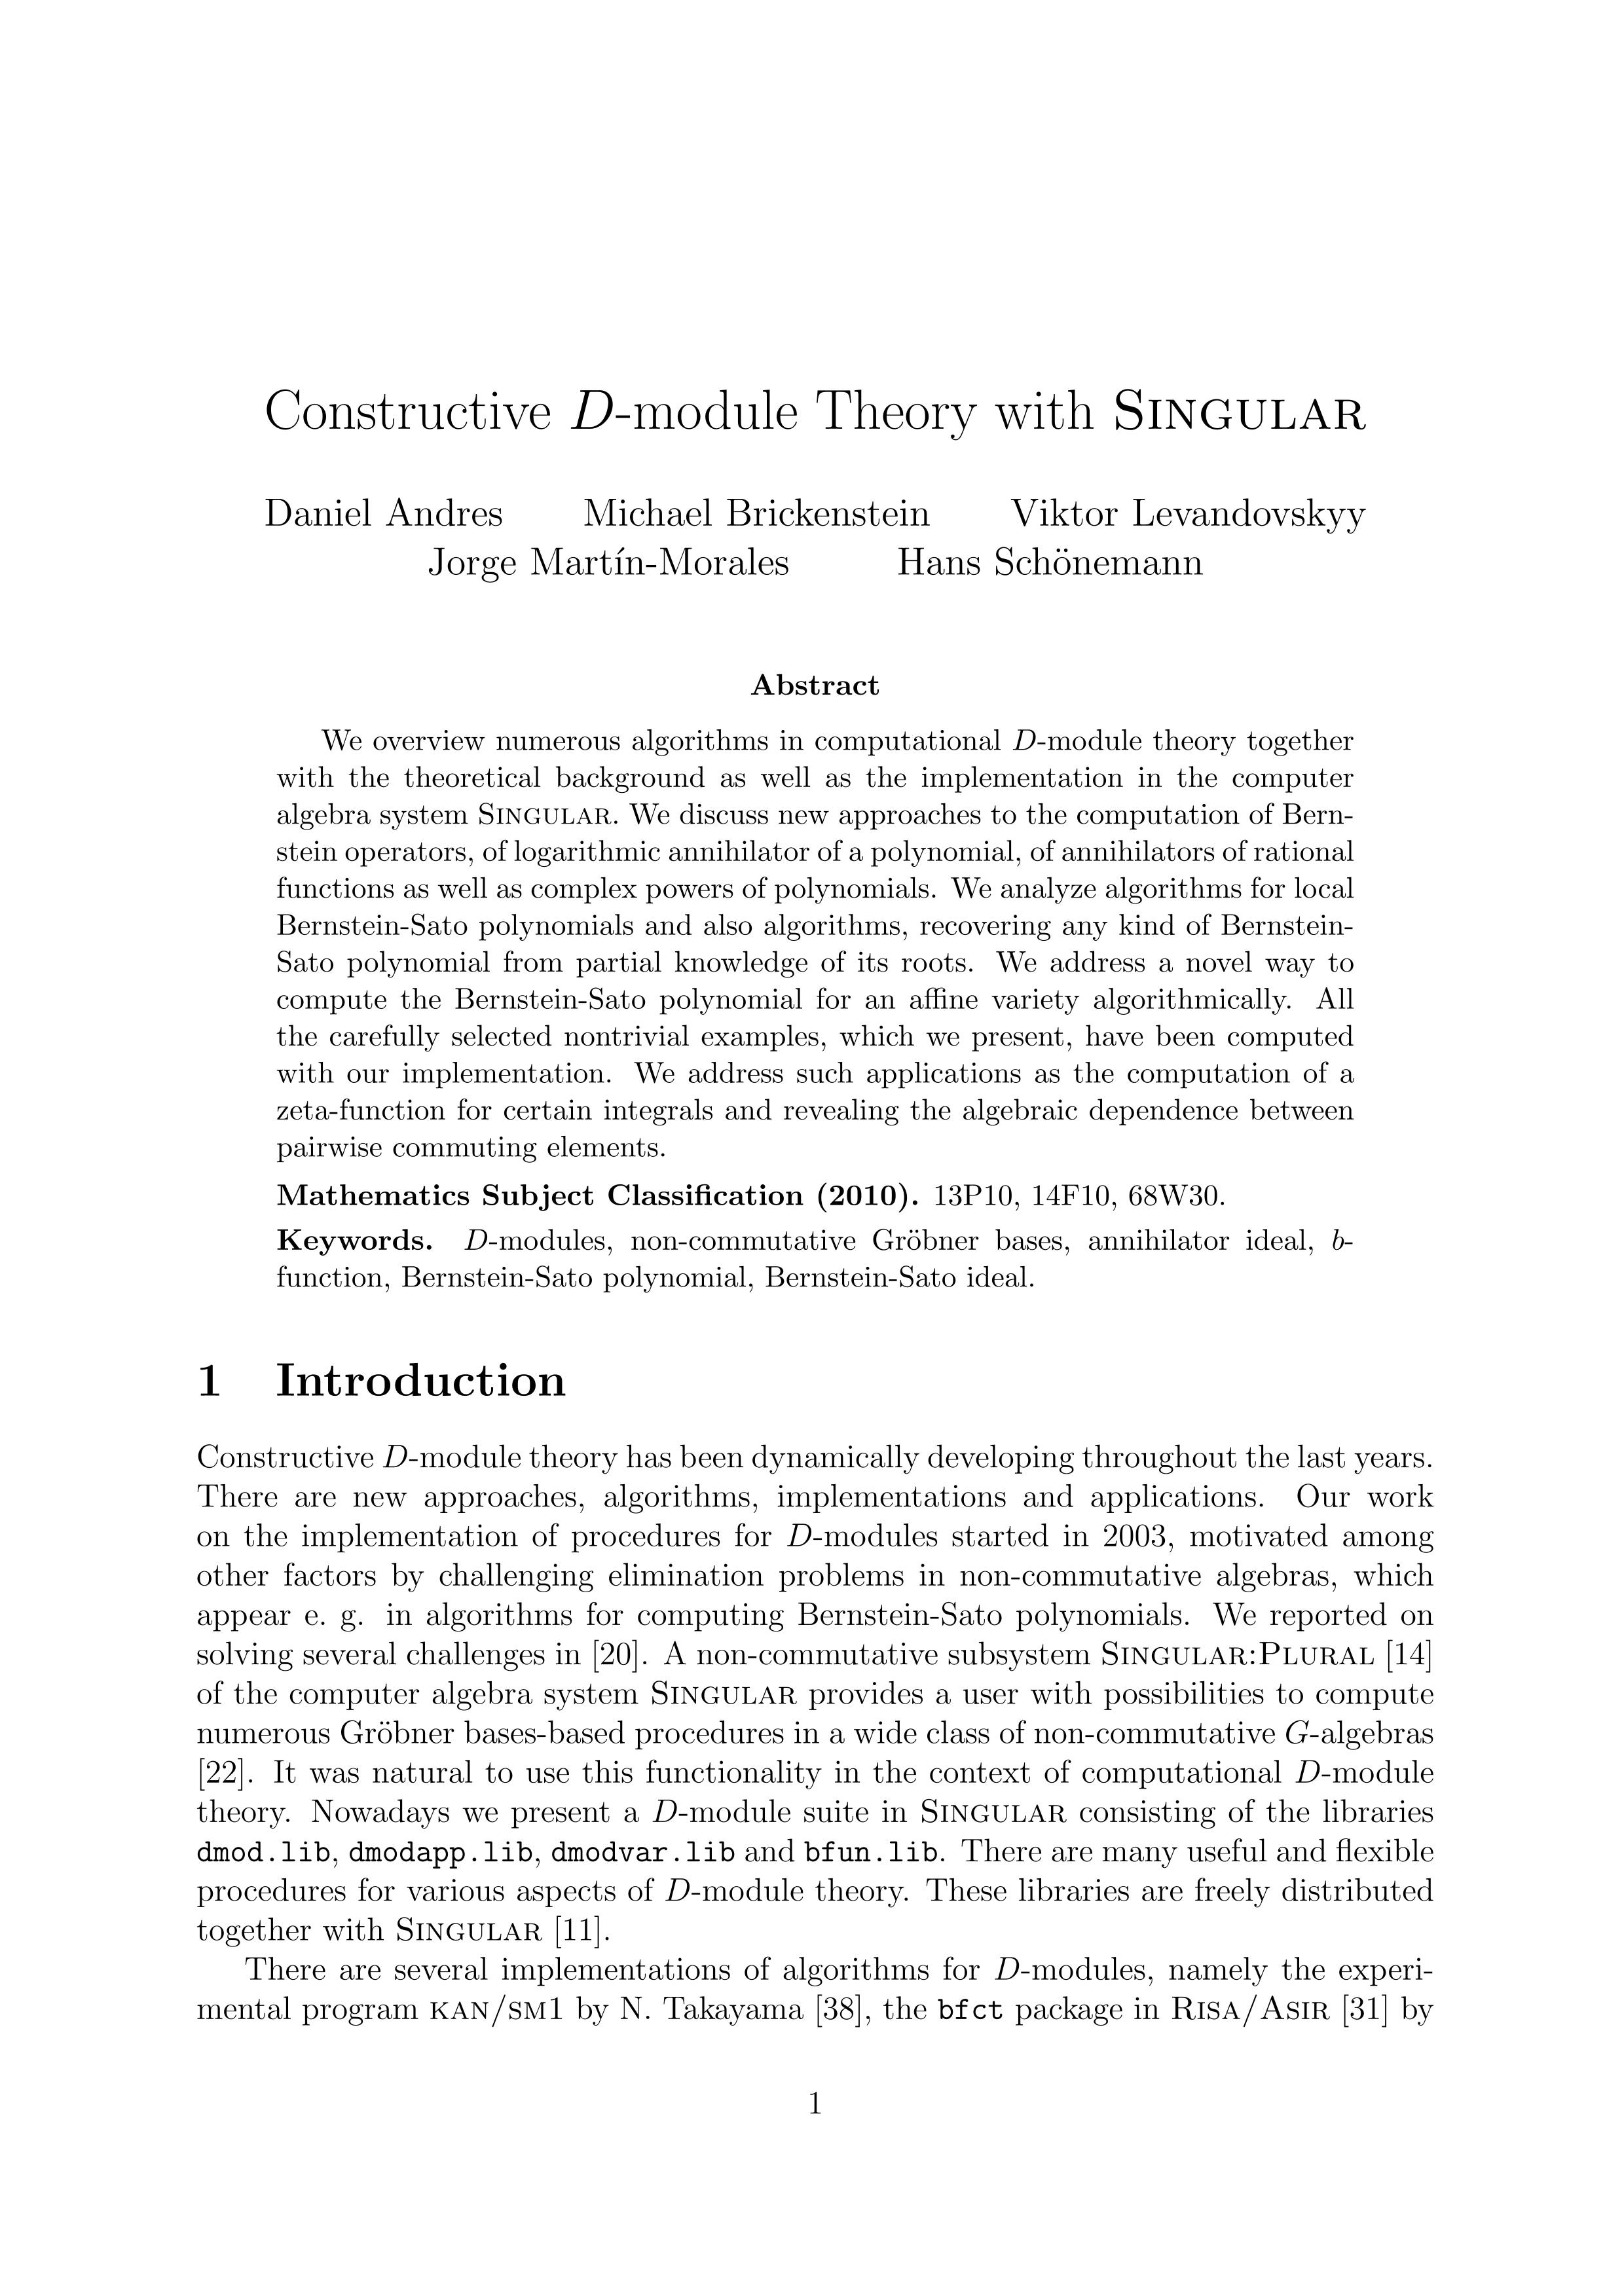 Constructive D-Module Theory with Singular